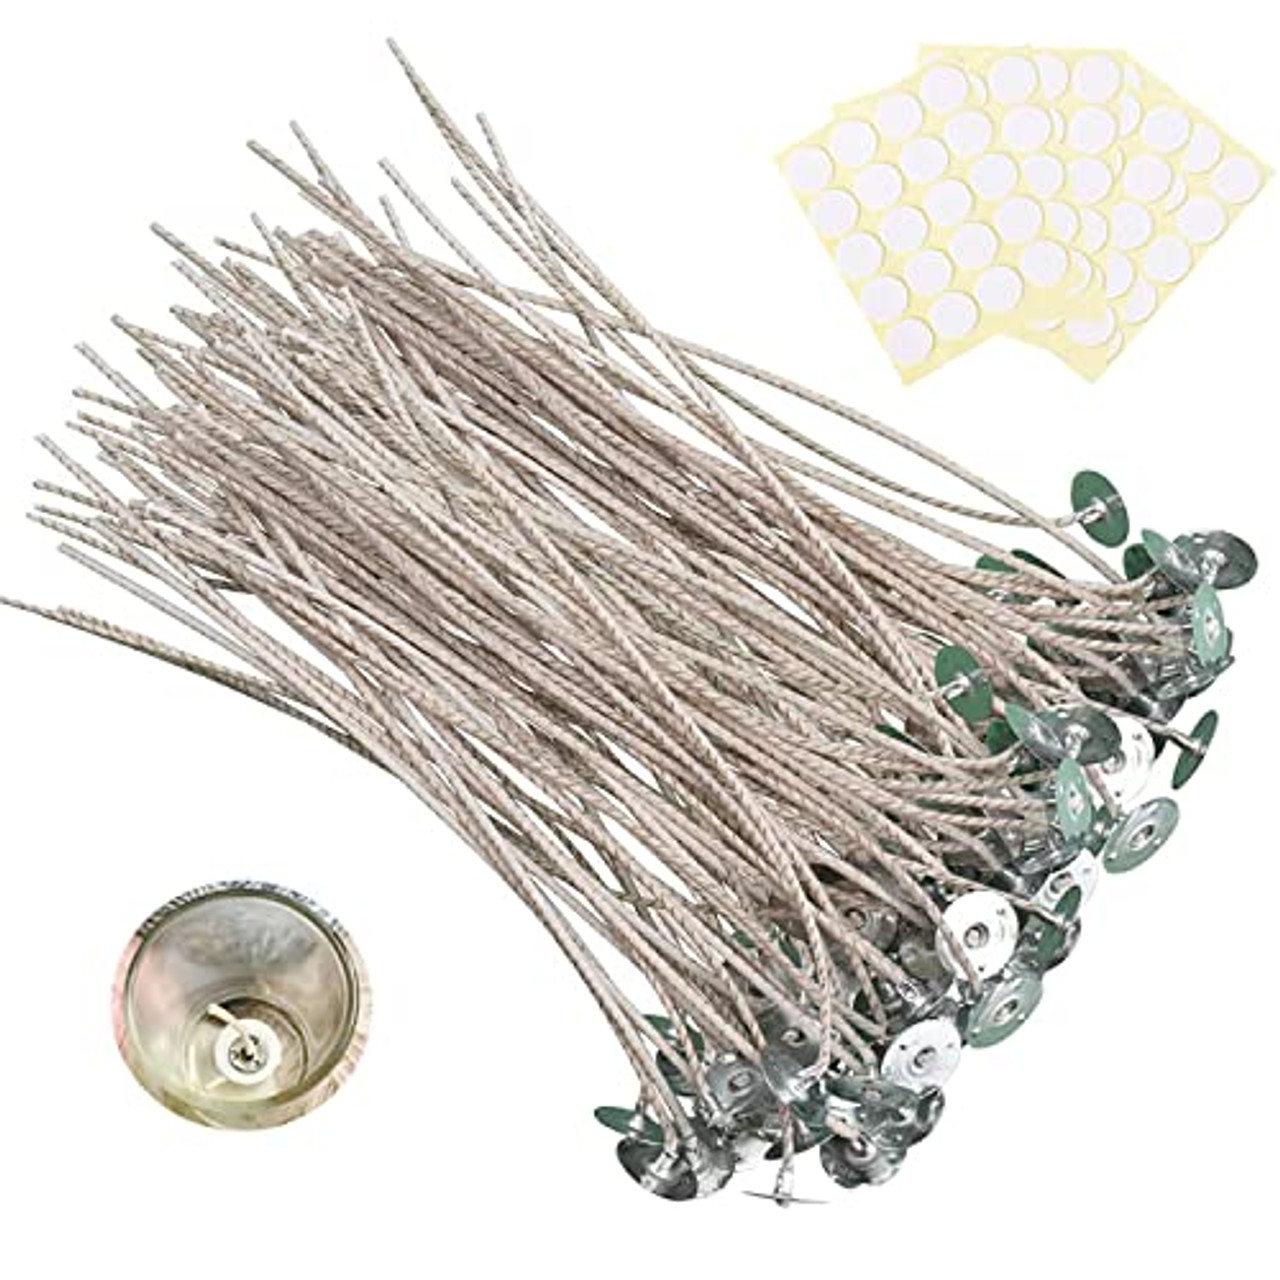 100 pcs ECO Wicks for Soy Candles, 6 inches Cotton Candle Wicks with Base,  Low Smoke, No Peculiar Smell with 100PCS Candle Wick Stickers, for Soy Wax.